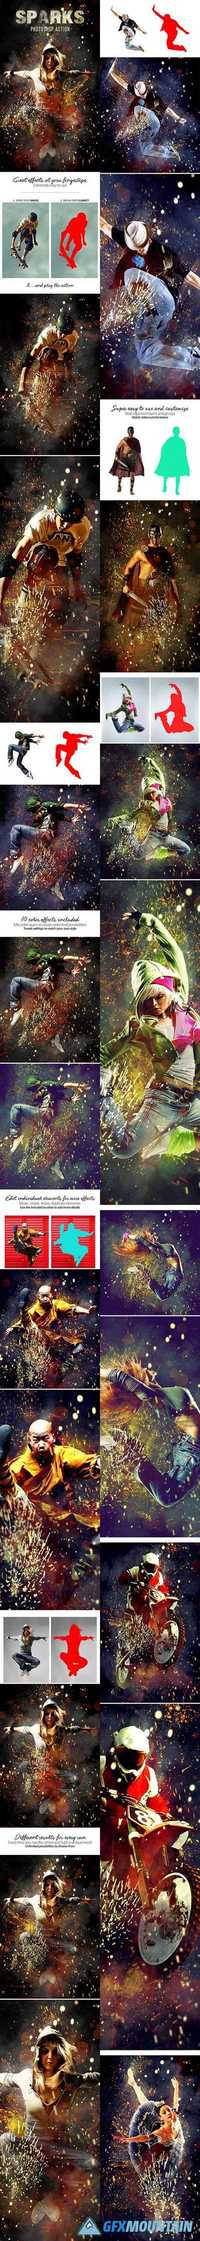 GraphicRiver - Sparks Photoshop Action - 19420143